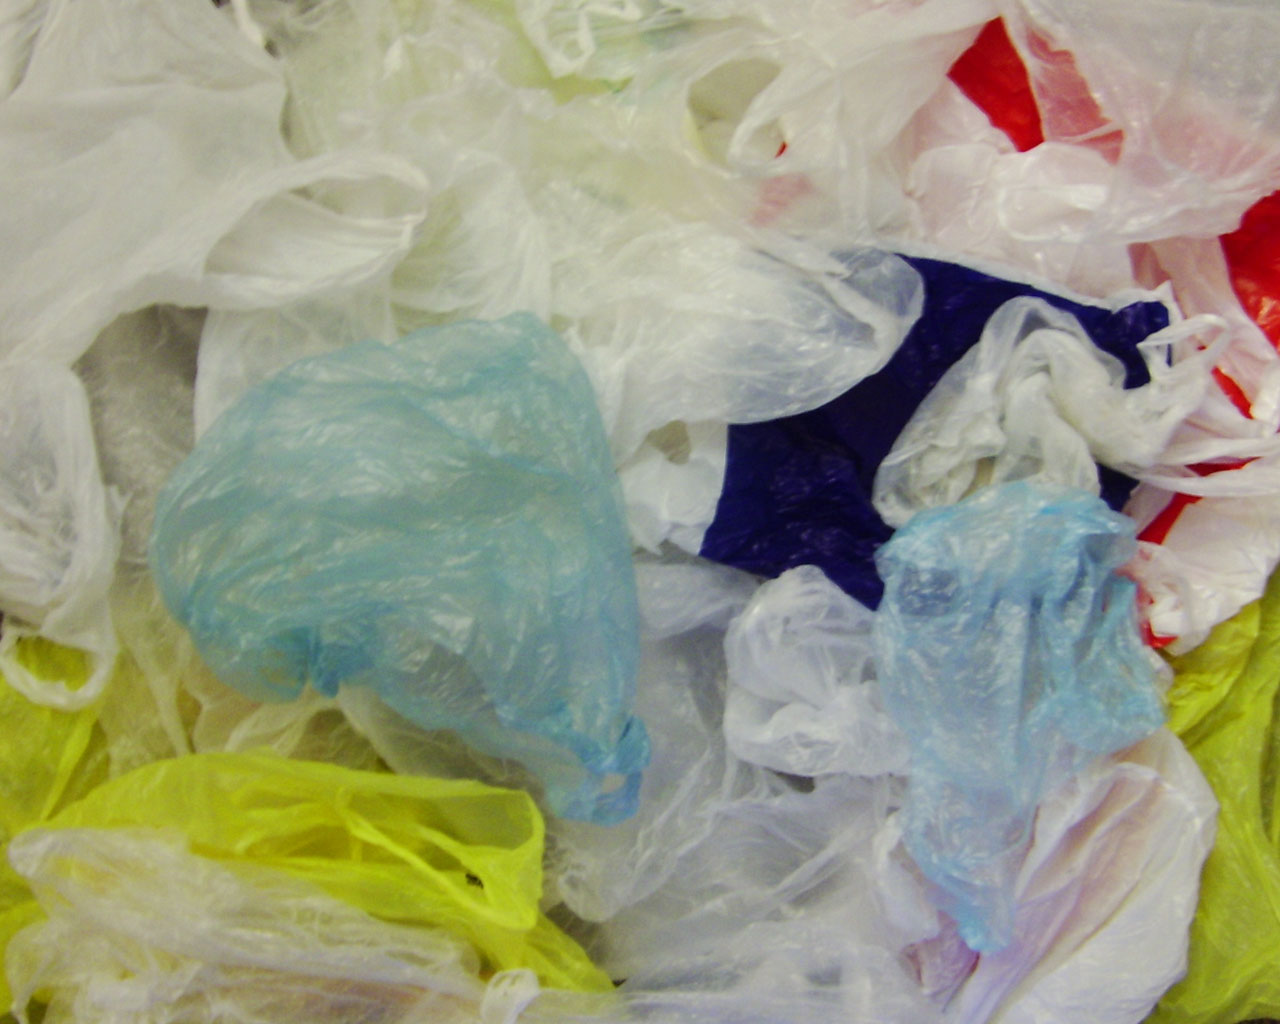 New Jersey Bill Proposes Strictest Plastic Ban In the Nation